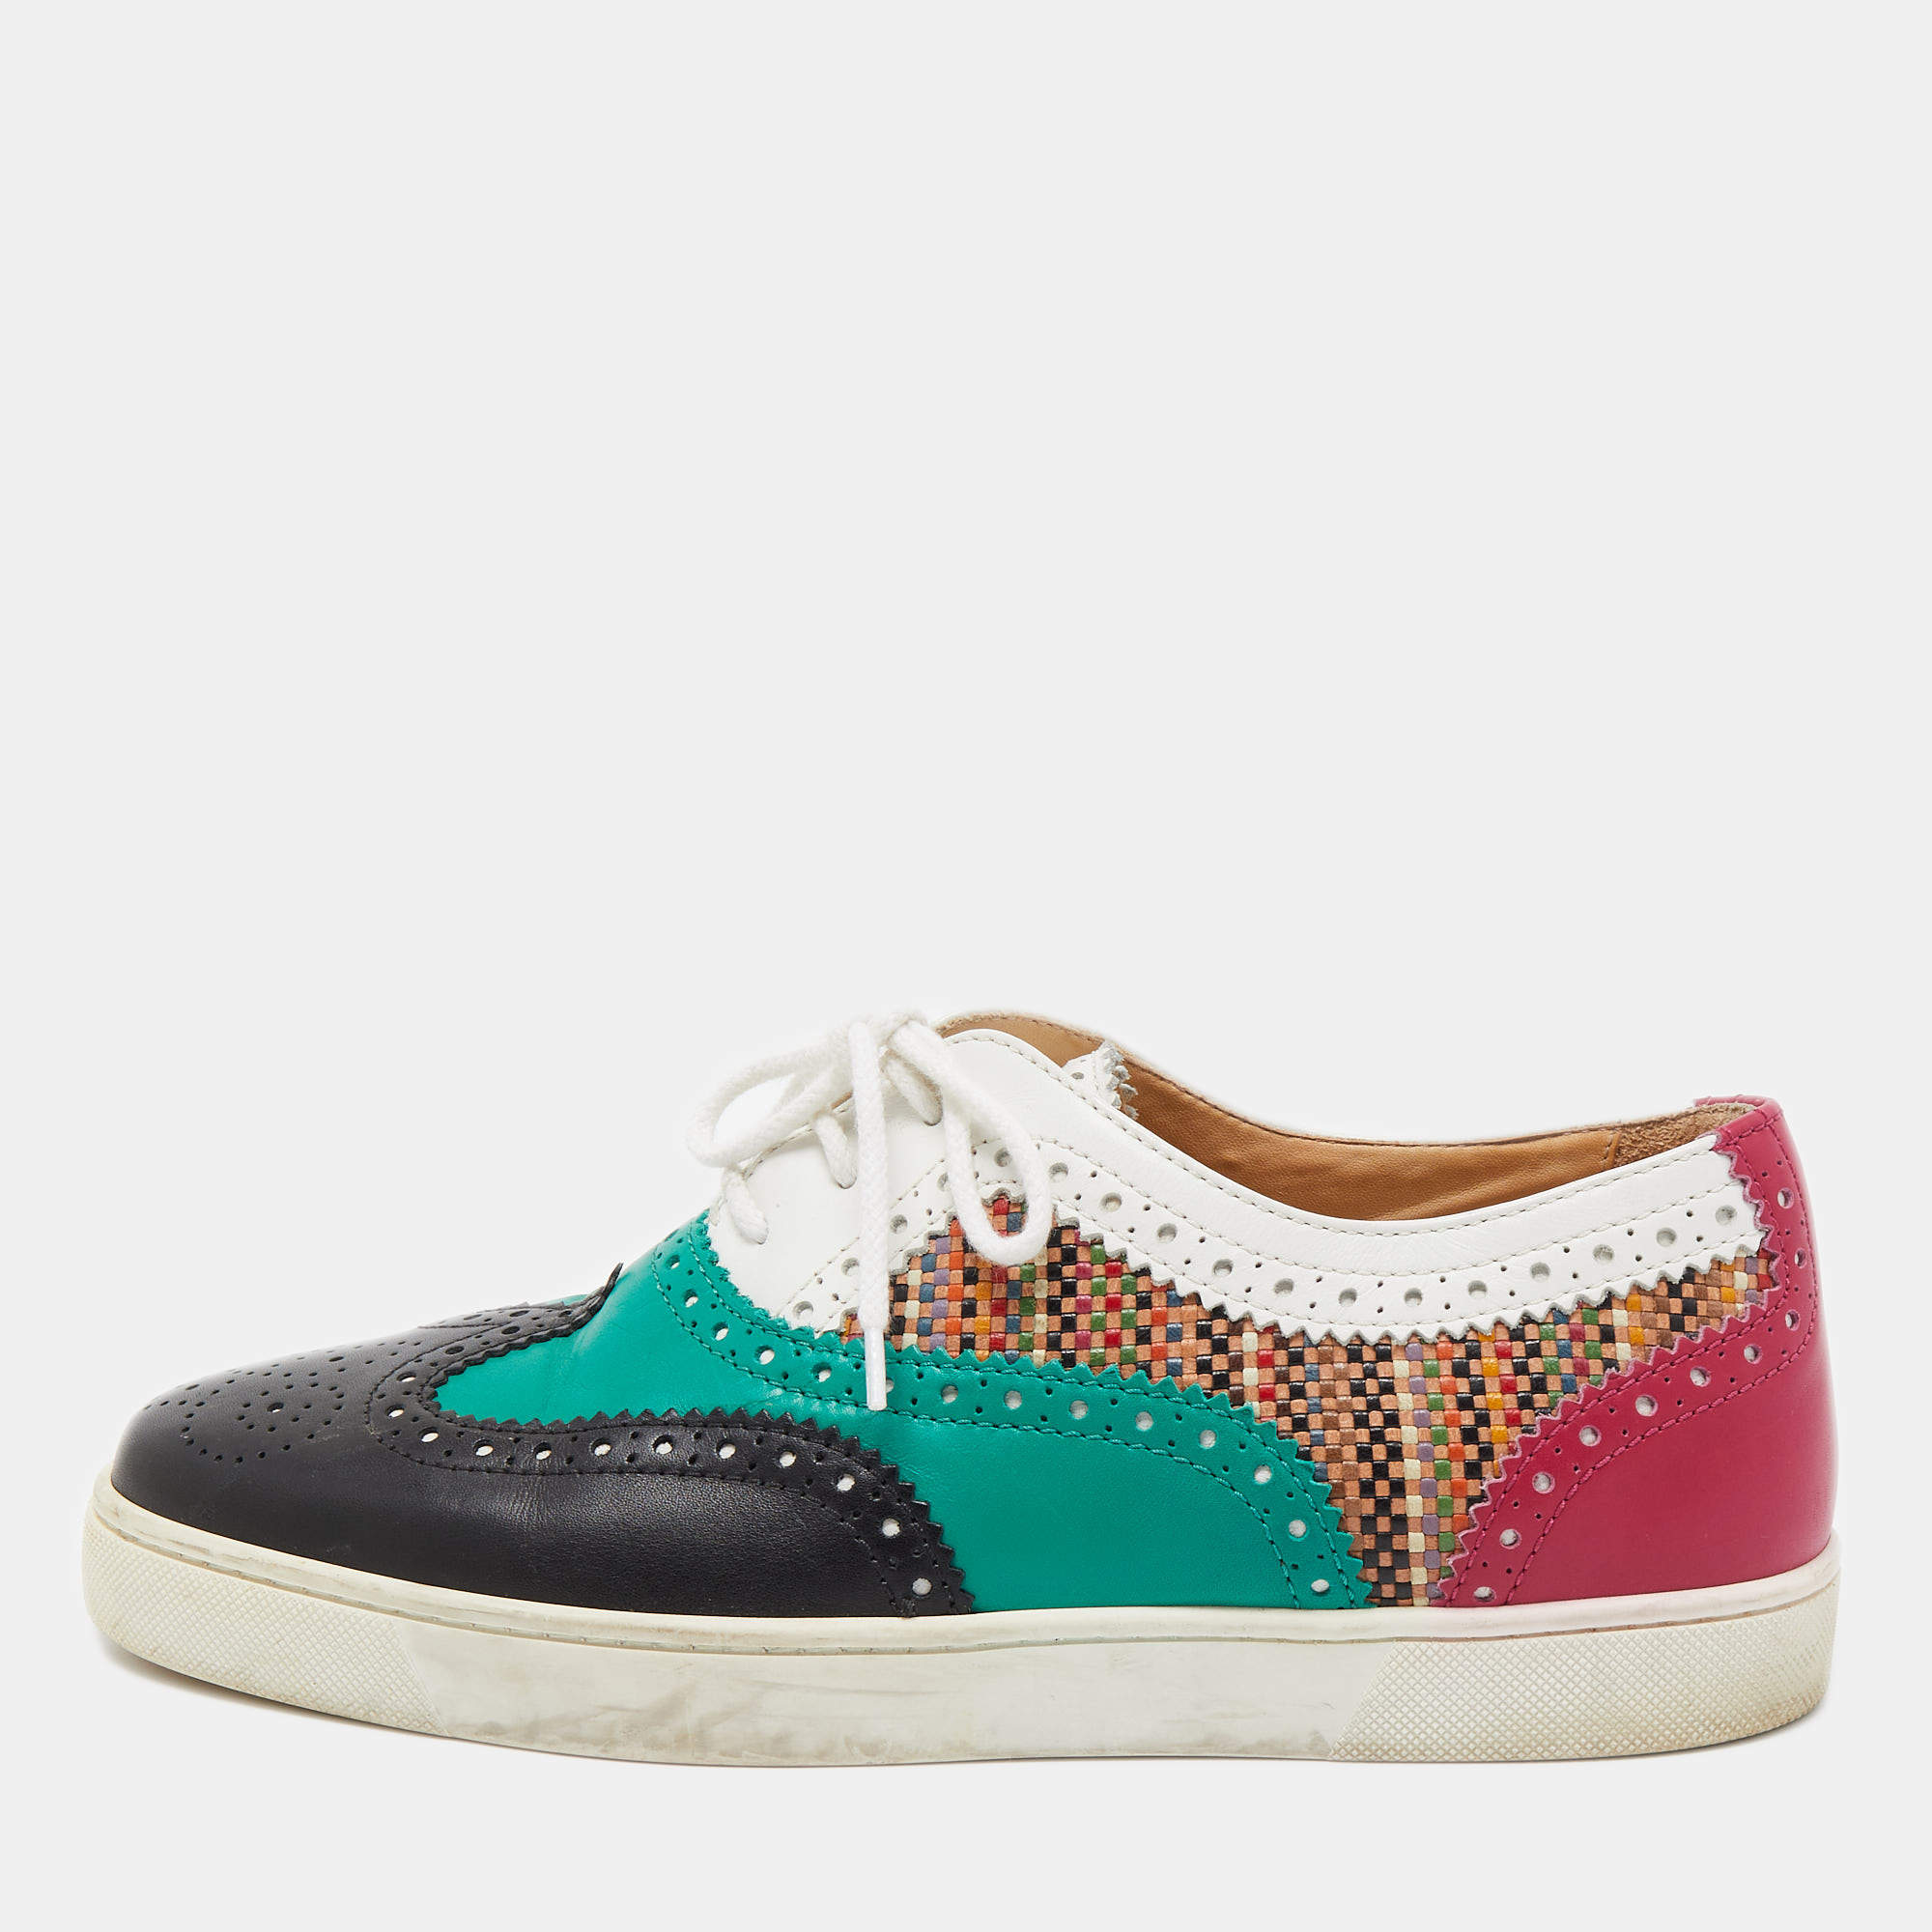 Christian Louboutin Multicolor Leather Oxford Sneakers Size 43